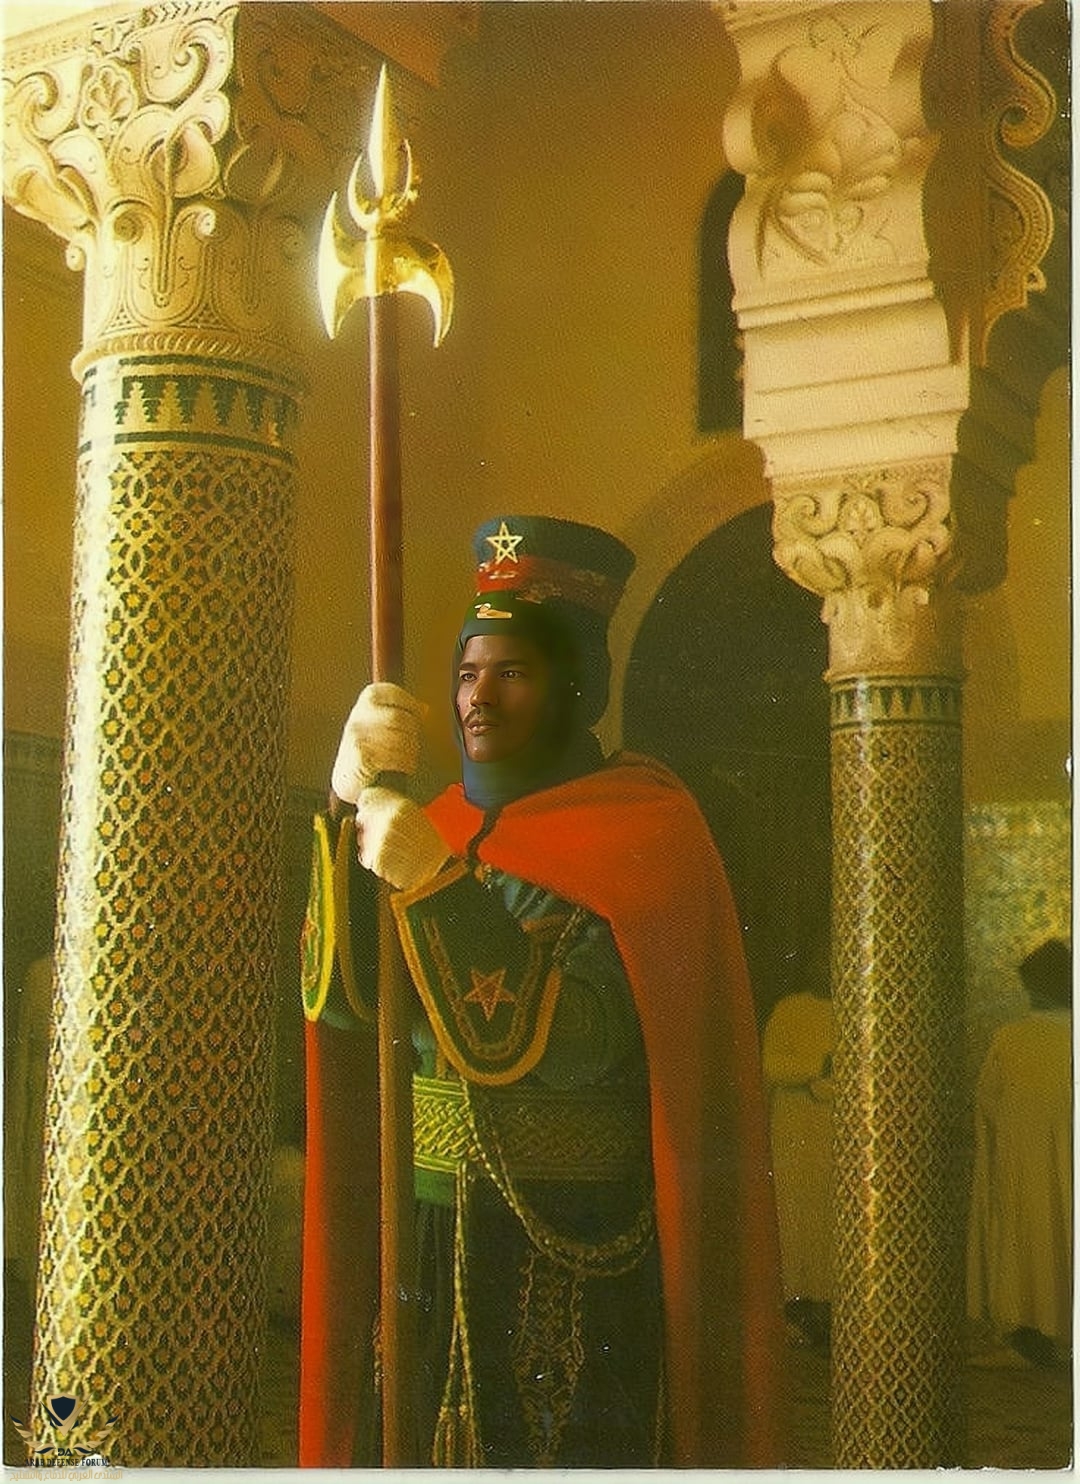 the-old-moroccan-royal-guard-outfit-is-very-aesthetic-v0-f01w1qh8xlcb1.jpg